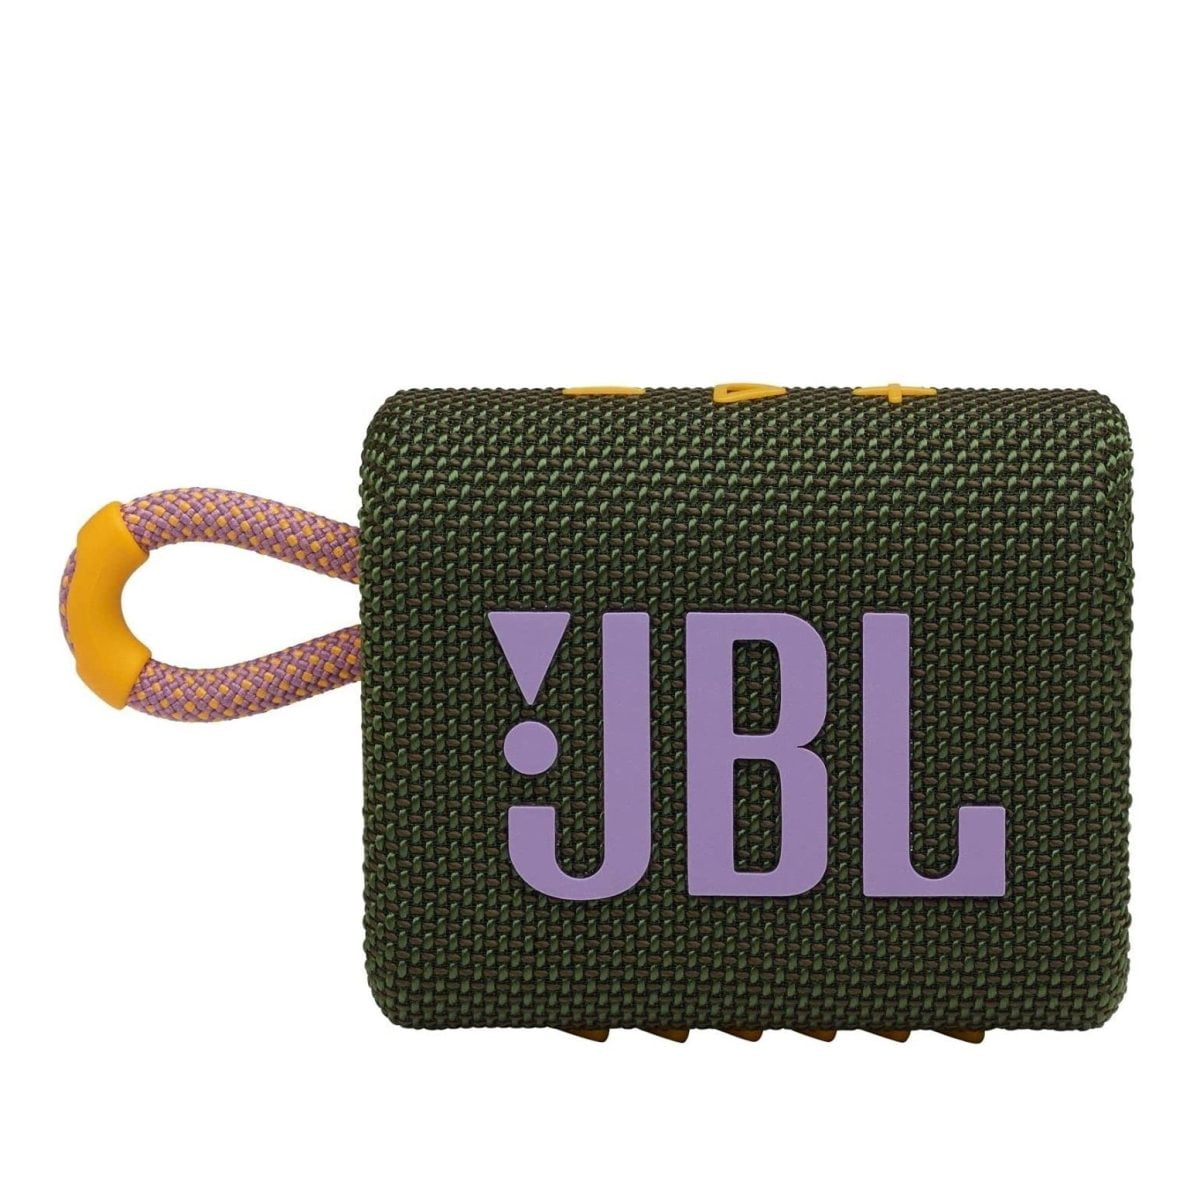 71Tv9Yfbcnl. Ac Sl1500 Jbl &Lt;H1&Gt;Jbl Go 3 Portable Waterproof Speaker - Green&Lt;/H1&Gt; Https://Www.youtube.com/Watch?V=Jjcejstflkq Jbl Go 3 Features Bold Styling And Rich Jbl Pro Sound. With Its New Eye-Catching Edgy Design, Colorful Fabrics And Expressive Details This A Must-Have Accessory For Your Next Outing. Your Tunes Will Lift You Up With Jbl Pro Sound, It’s Ip67 Waterproof And Dustproof So You Can Keep Listening Rain Or Shine, And With Its Integrated Loop, You Can Carry It Anywhere. Go 3 Comes In Completely New Shades And Color Combinations Inspired By Current Street Fashion. Jbl Go 3 Looks As Vivid As It Sounds. Jbl Speaker Jbl Go 3 Portable Waterproof Speaker - Green